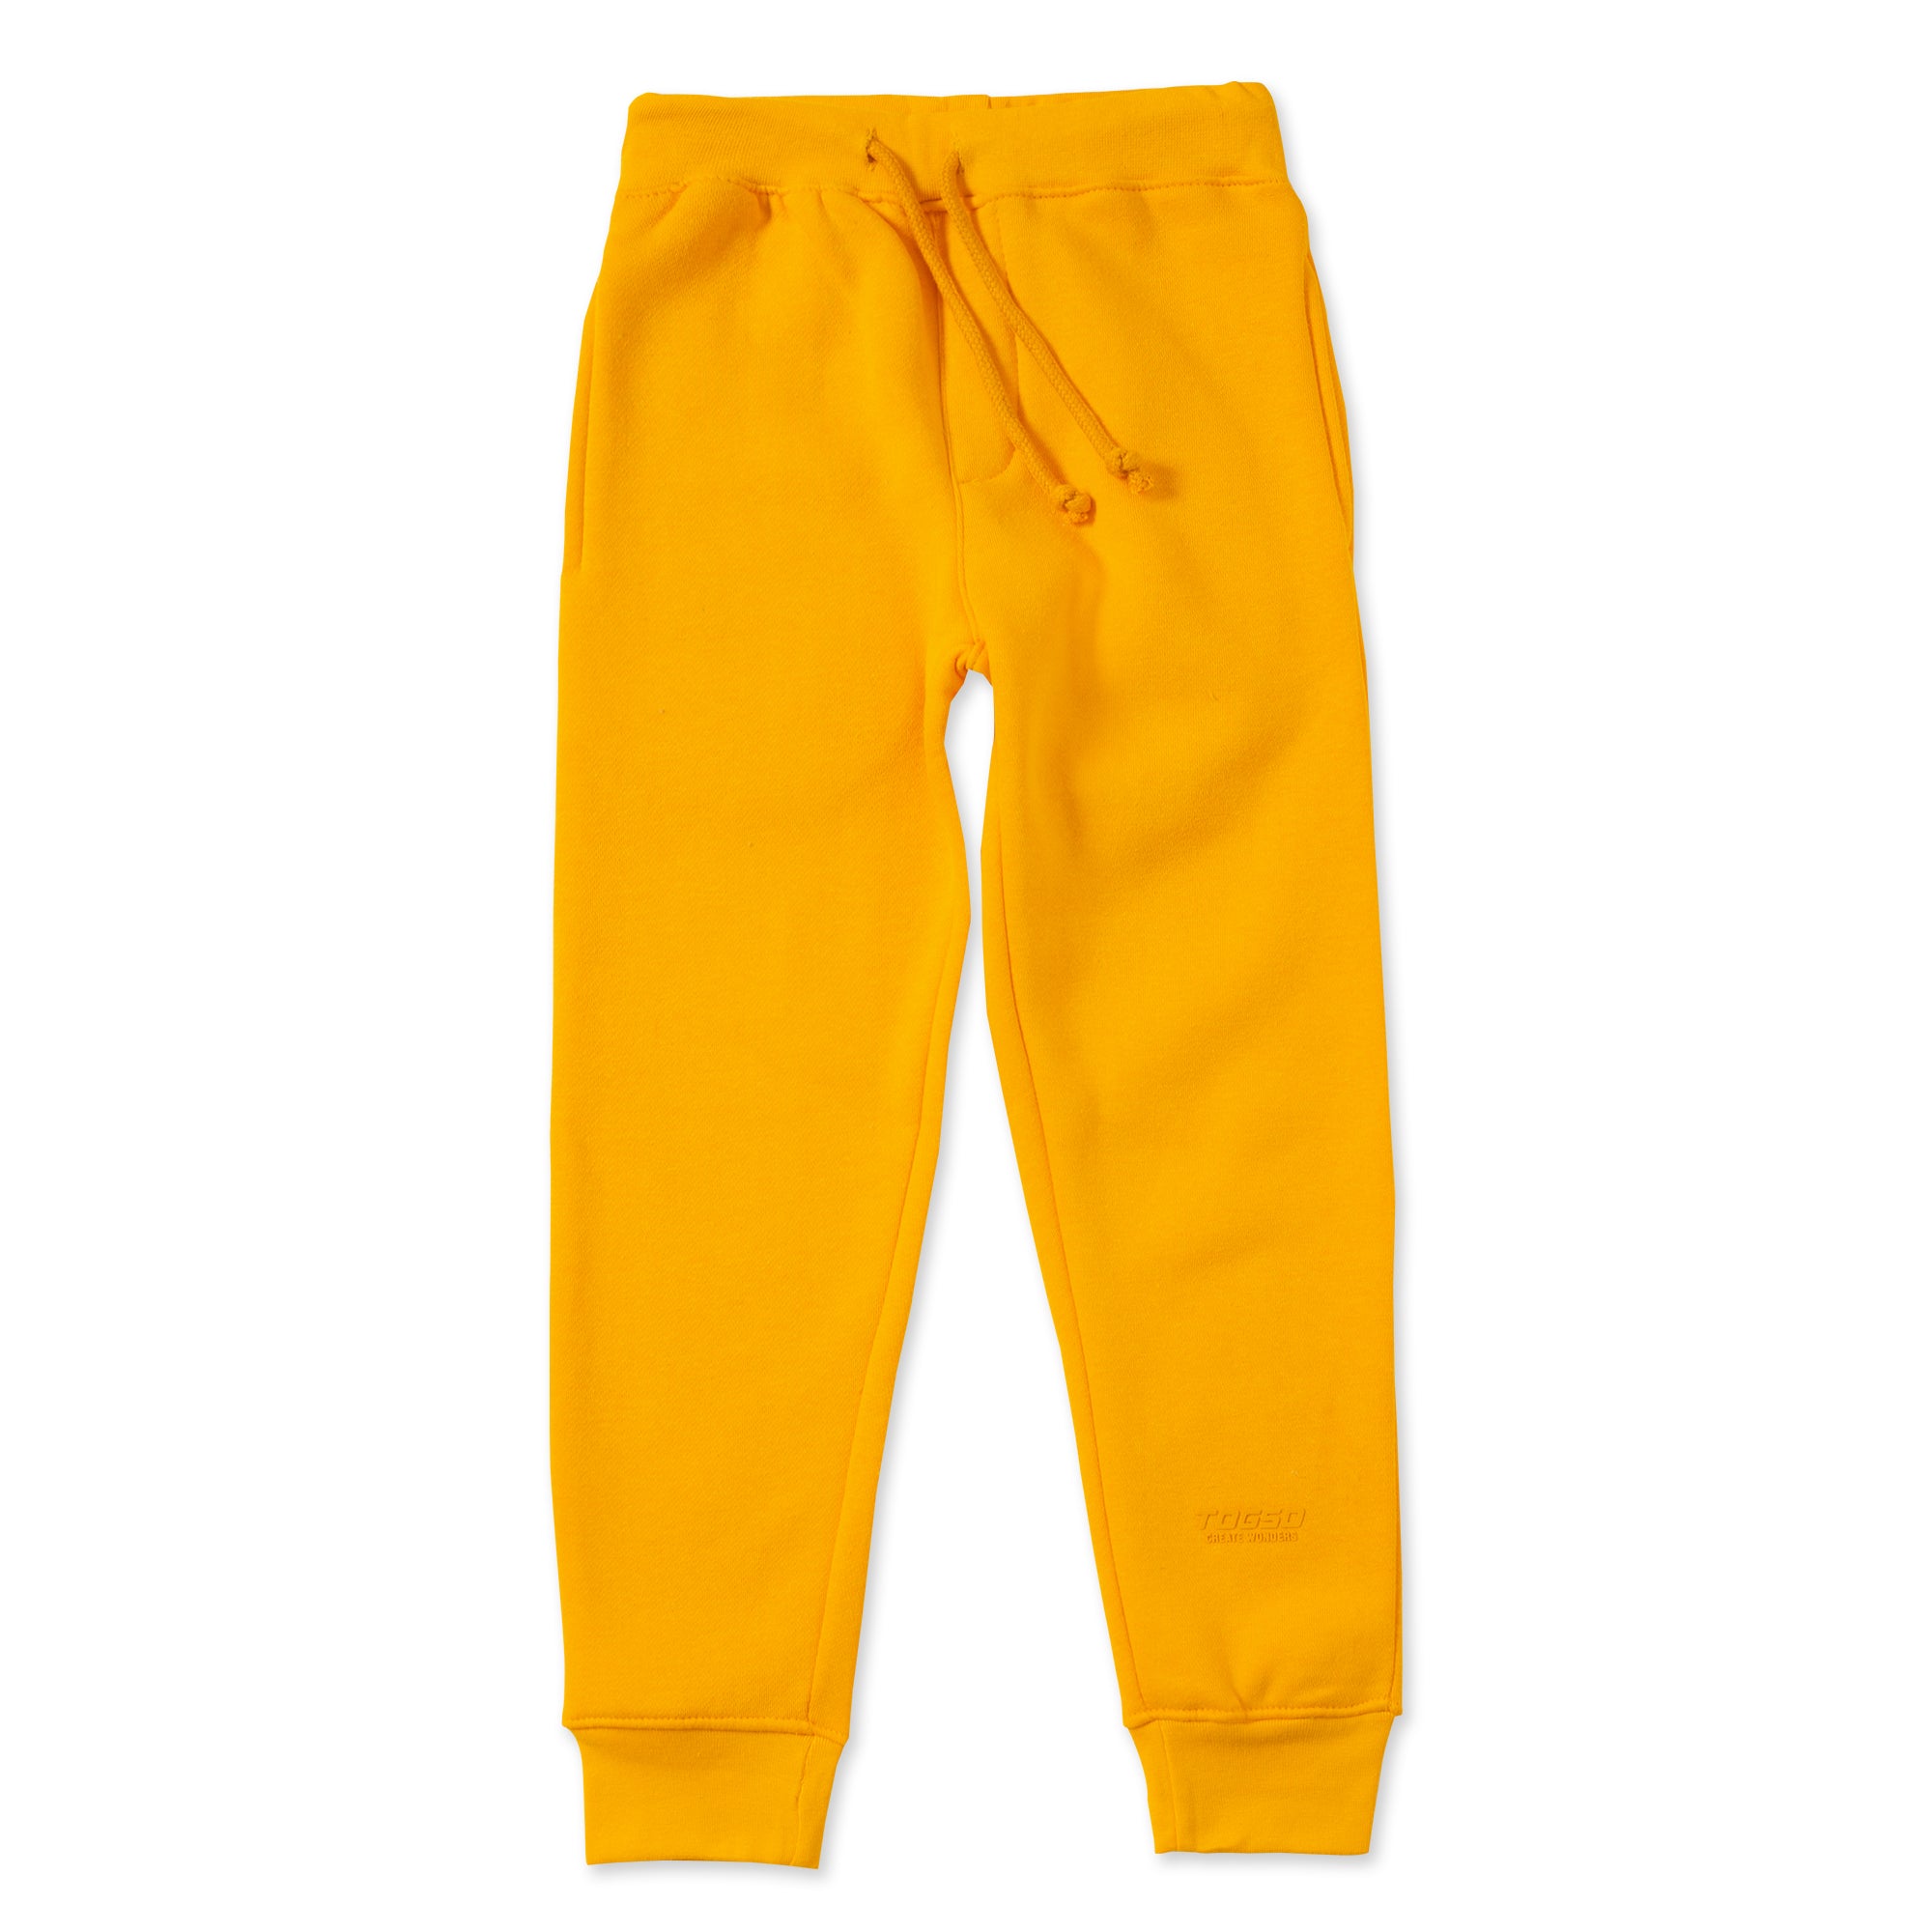 Togso Basic Yellow Track Suit